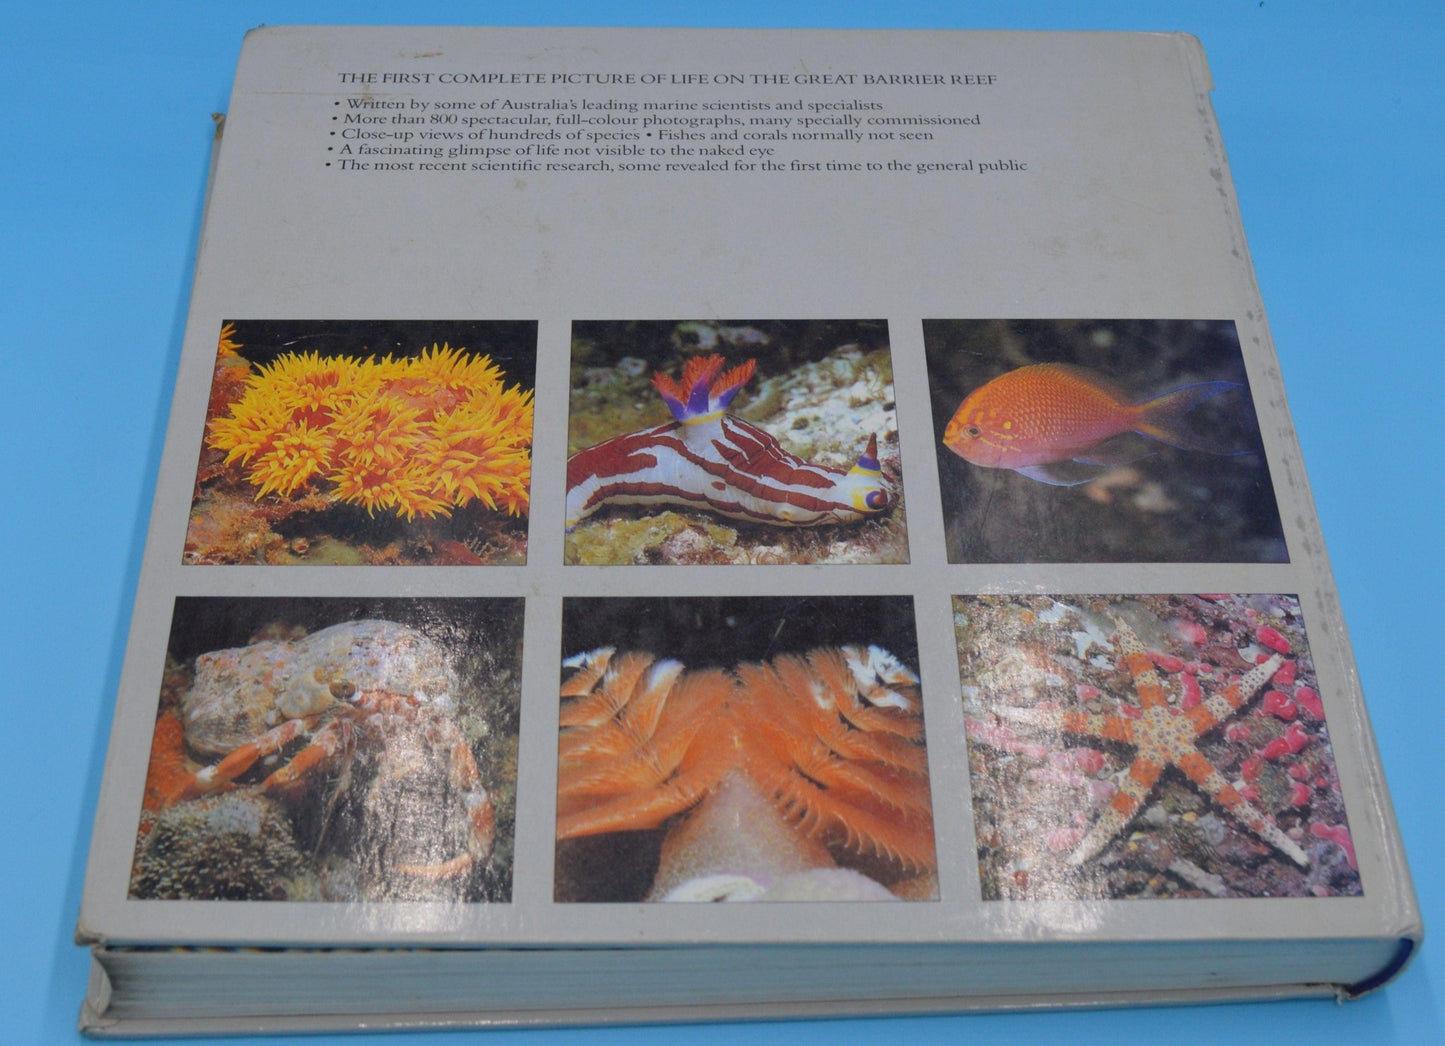 SECONDHAND BOOK READERS DIGEST THE GREAT BARRIER REEF - TMD167207